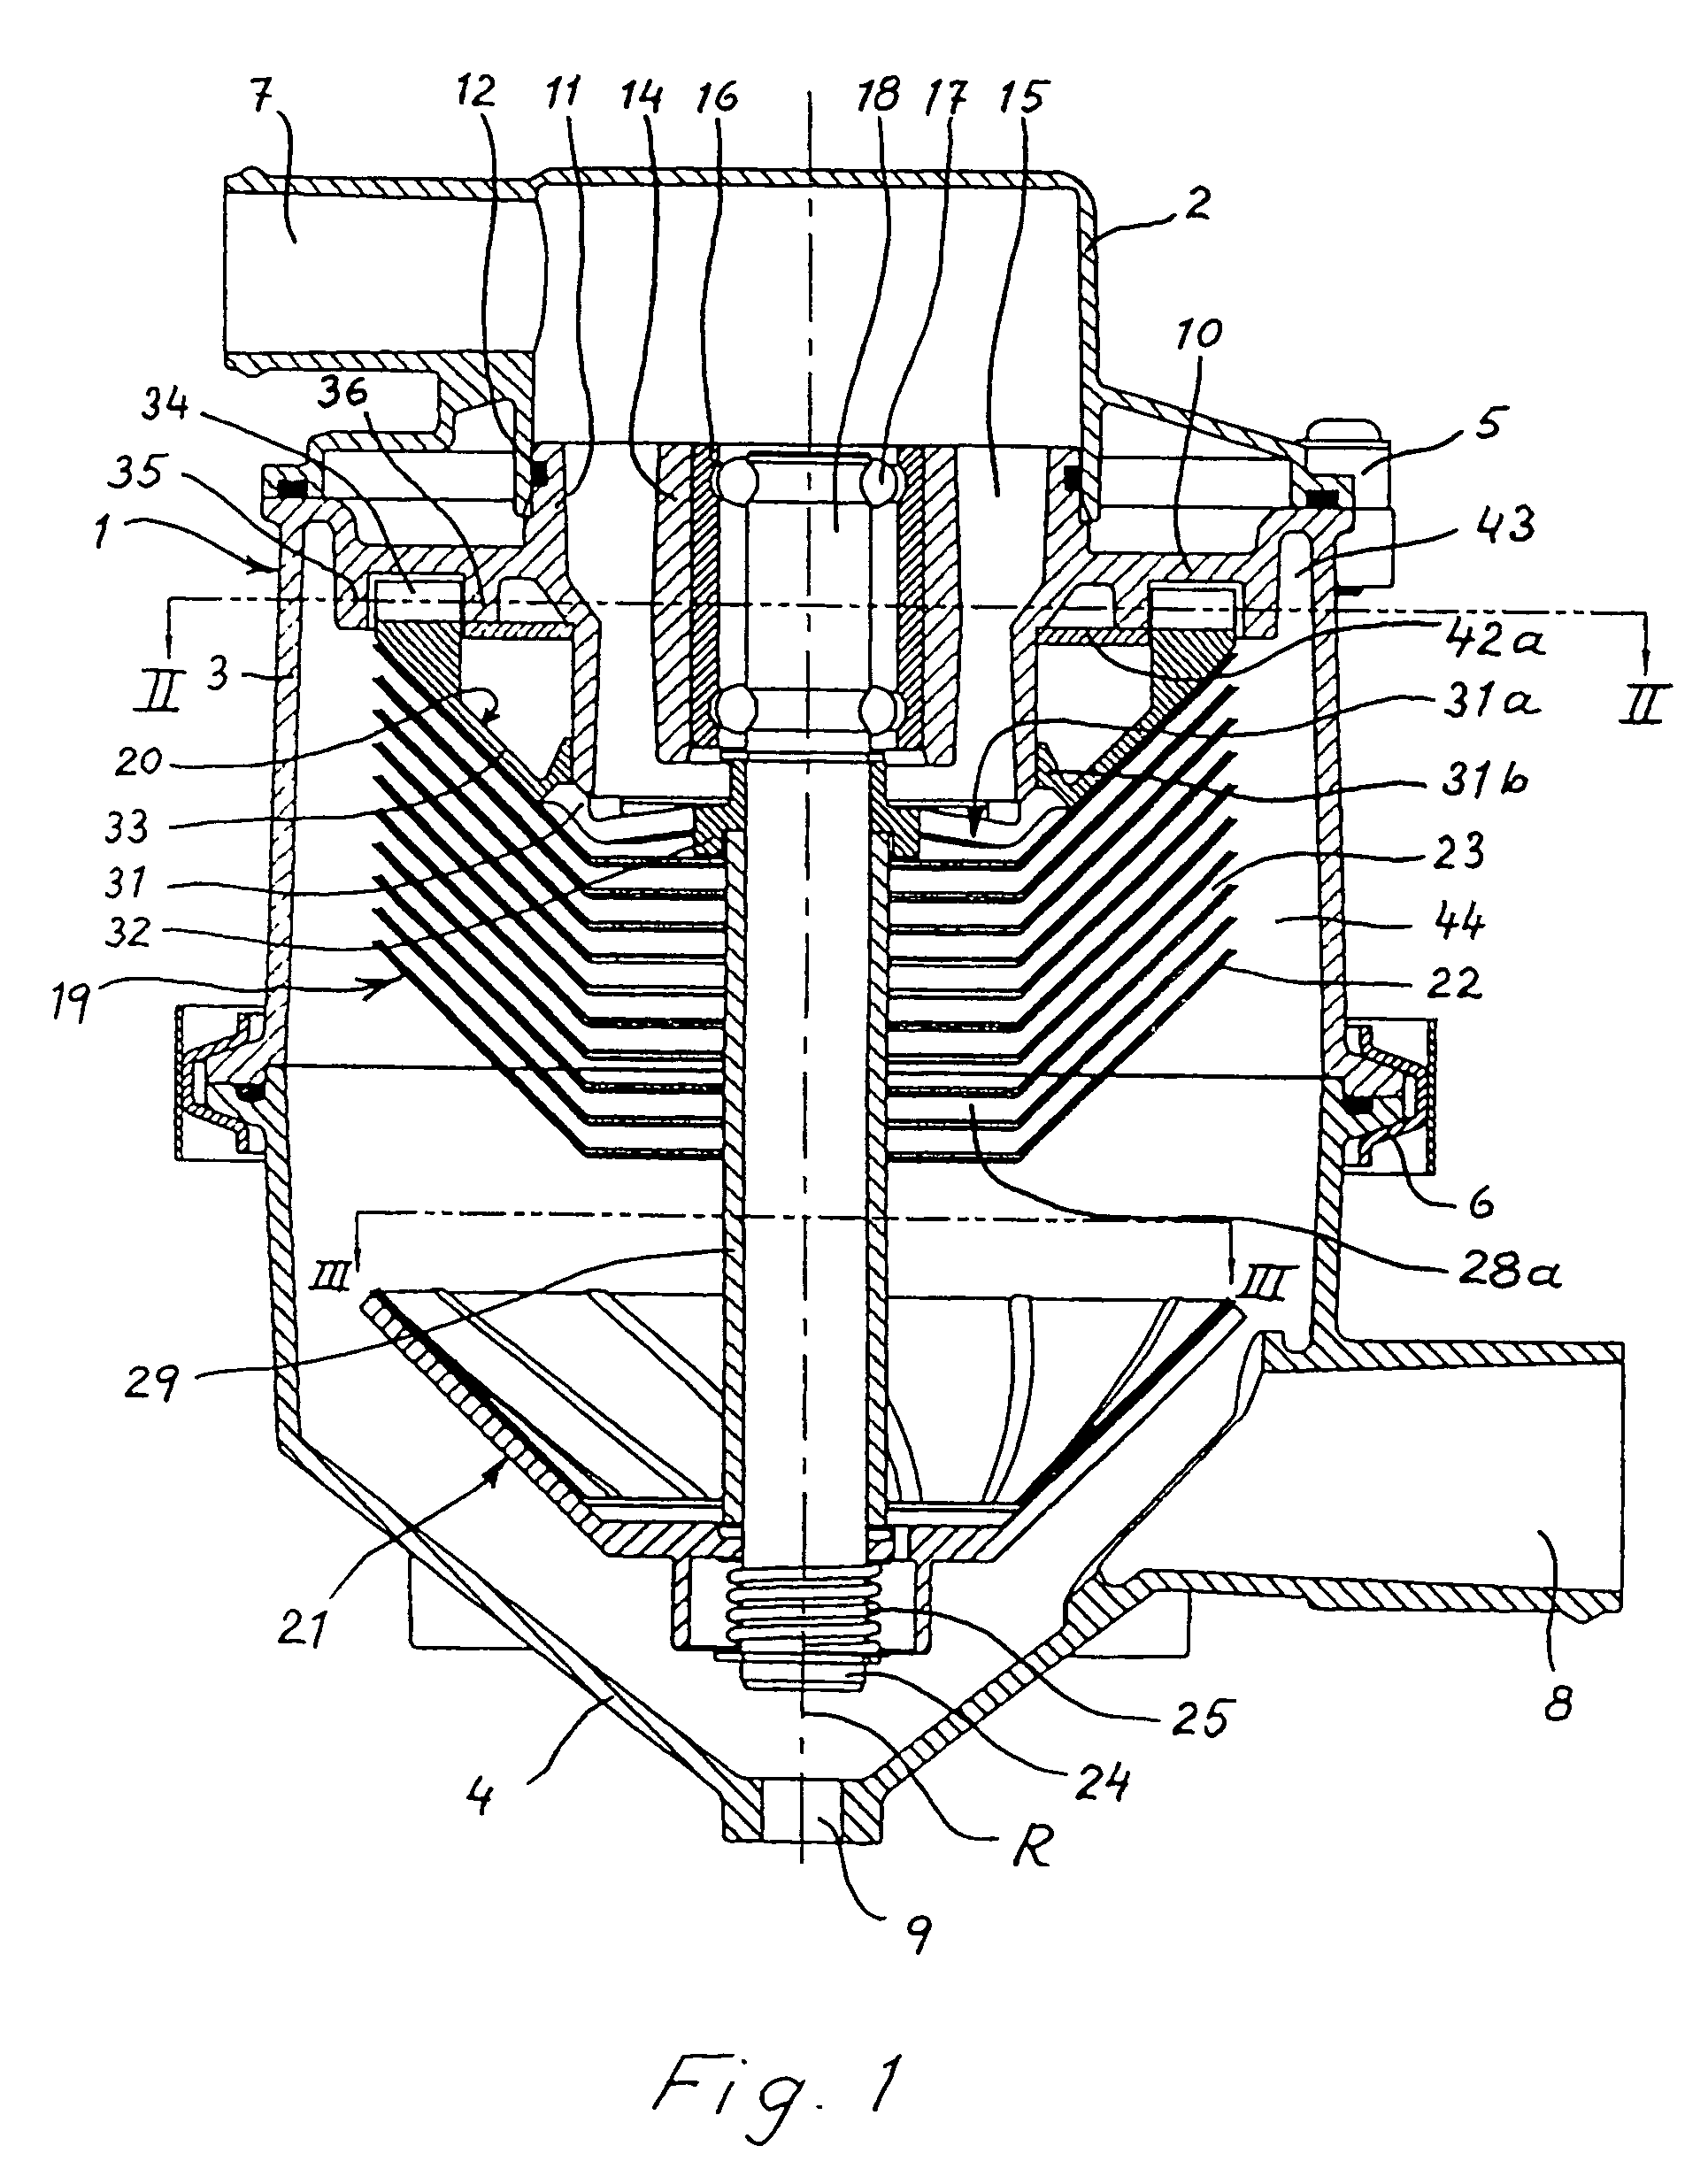 Centrifugal separator having a rotor and driving means thereof